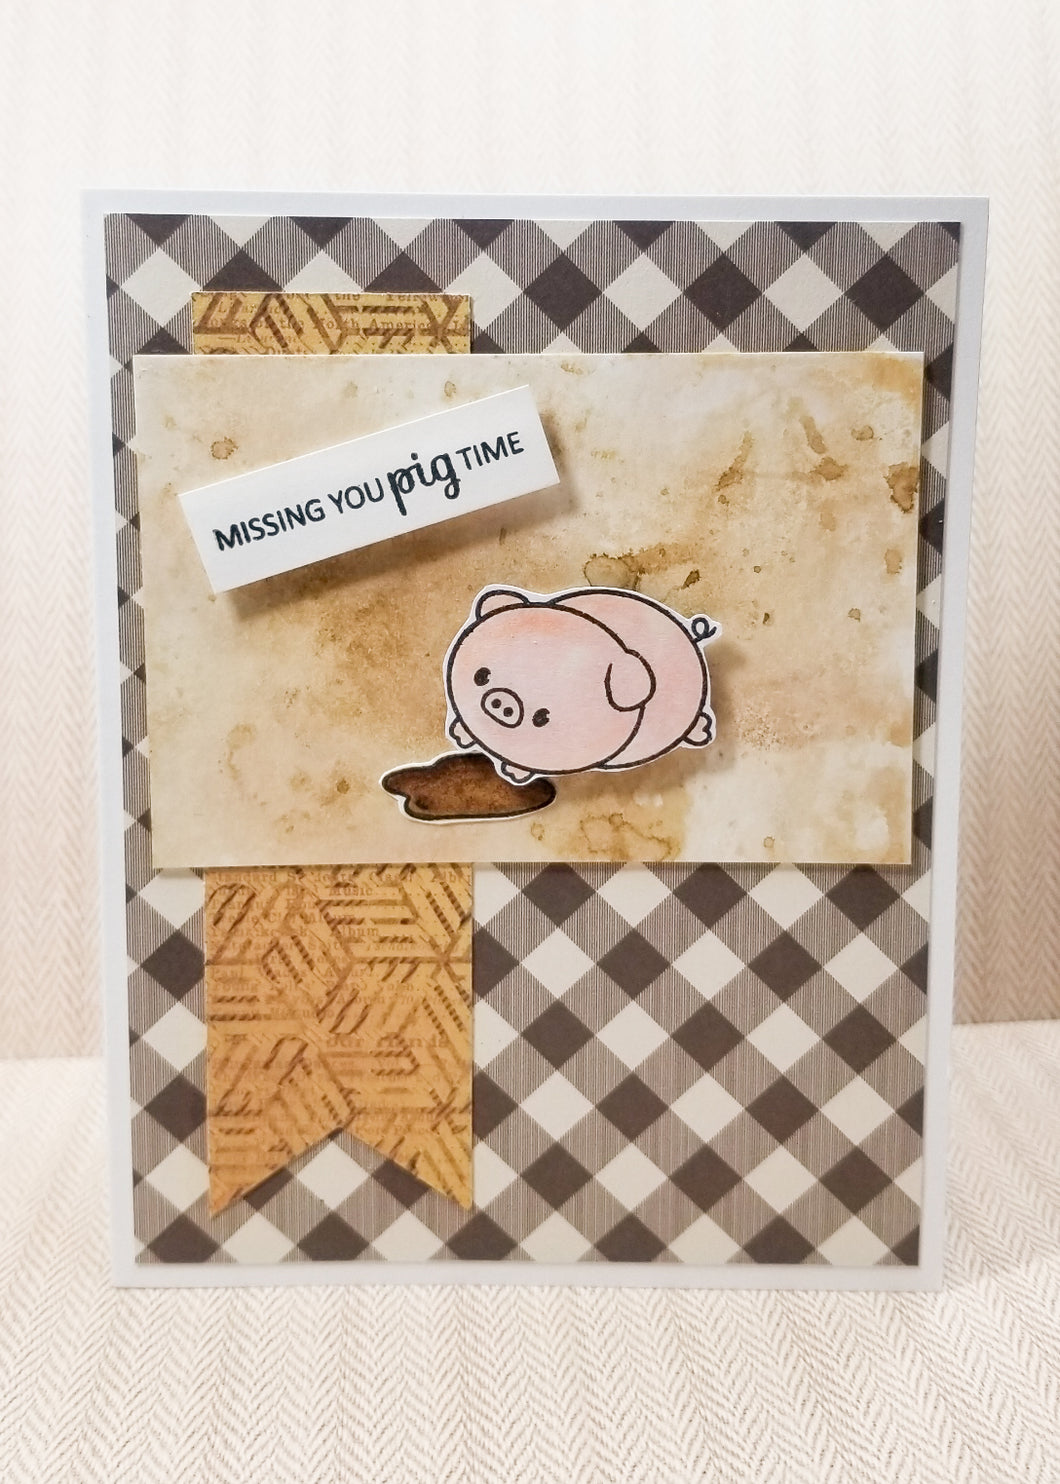 Missing You Pig Time Card